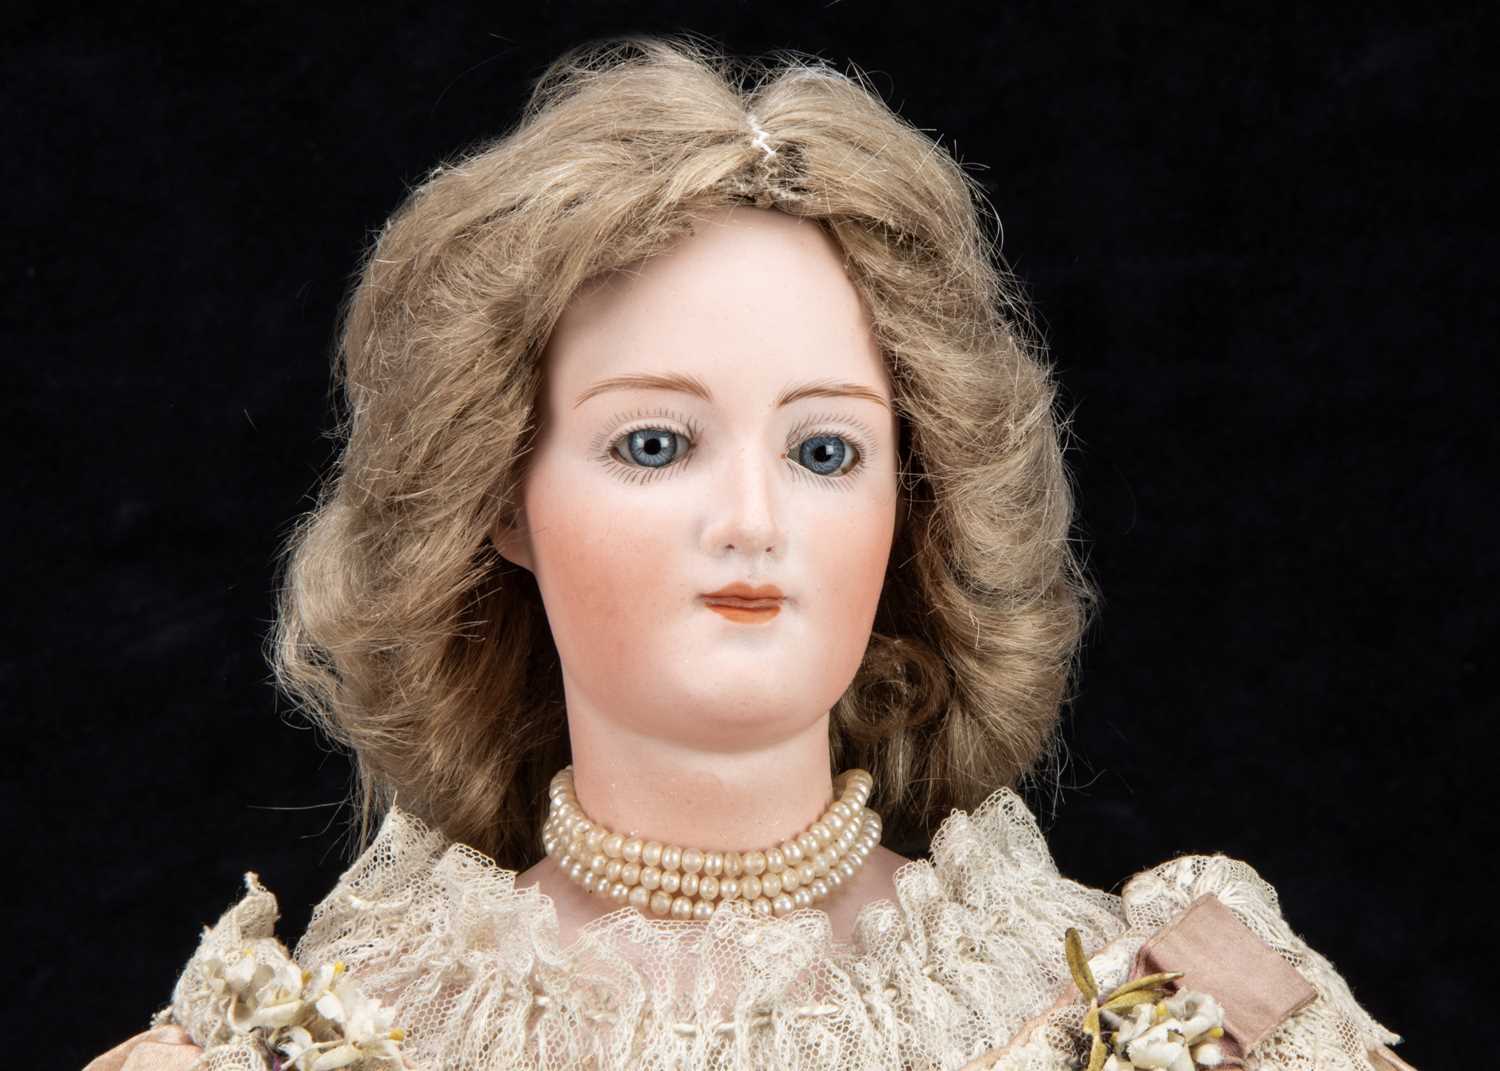 A fine Gebruder Heubach 7926 shoulder-head lady doll in late 19th century court dress, - Image 3 of 5